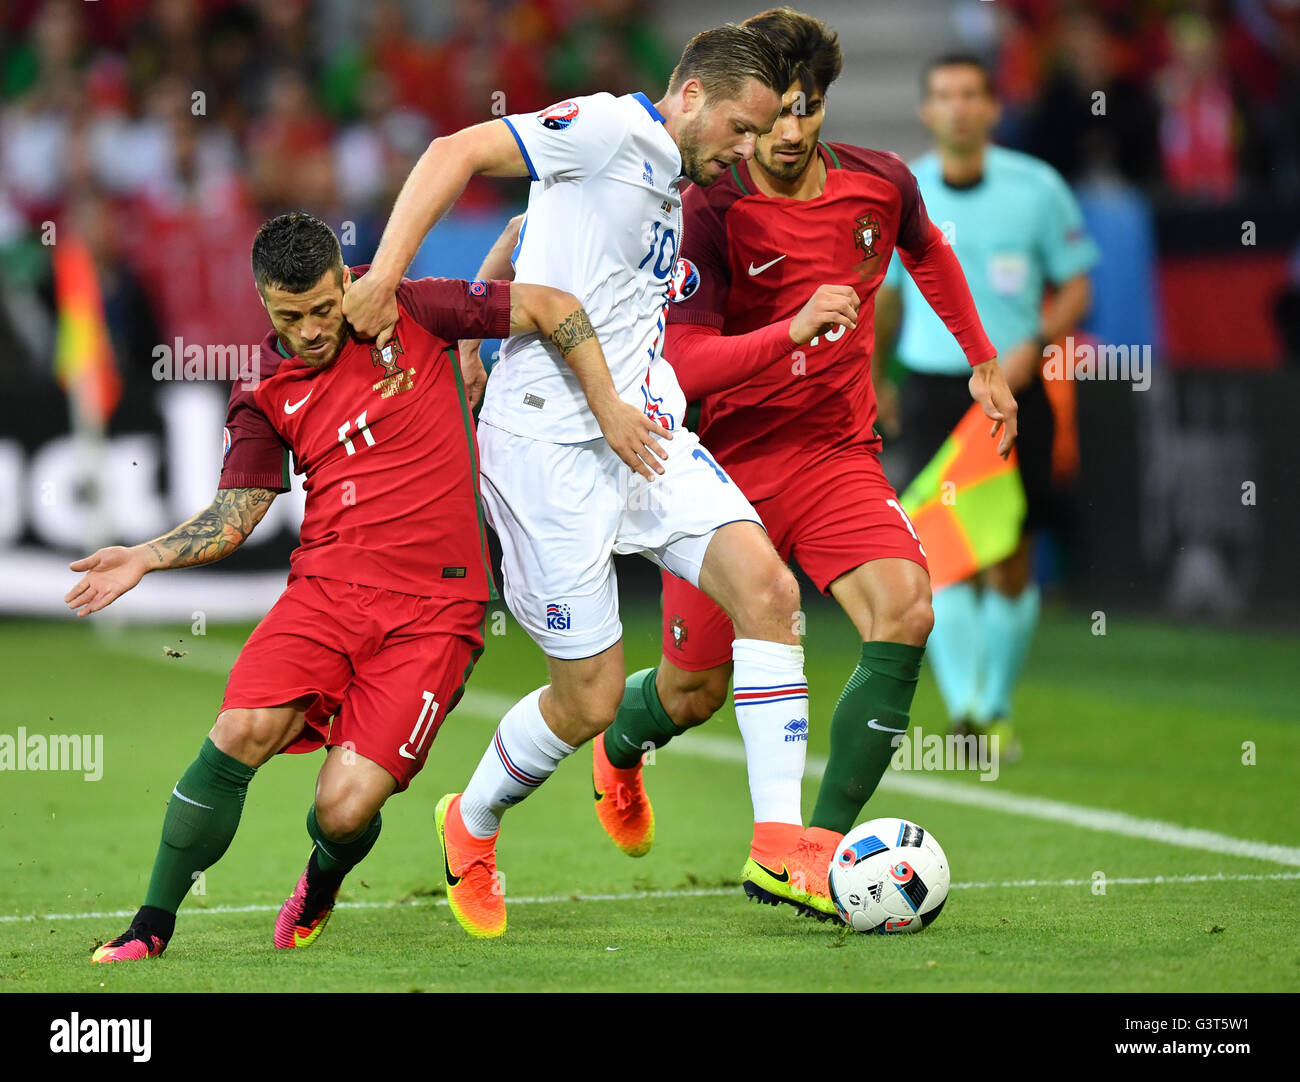 Saint-Etienne, France. 14th June, 2016. Vieirinha (L) and Andre Gomes of Portugal and Gylfi Sigurdsson of Iceland vie for the ball during the UEFA Euro 2016 Group F soccer match Portugal vs. Iceland at Stade Geoffroy Guichard in Saint-Etienne, France, 14 June 2016. Photo: Uwe Anspach/dpa/Alamy Live News Stock Photo